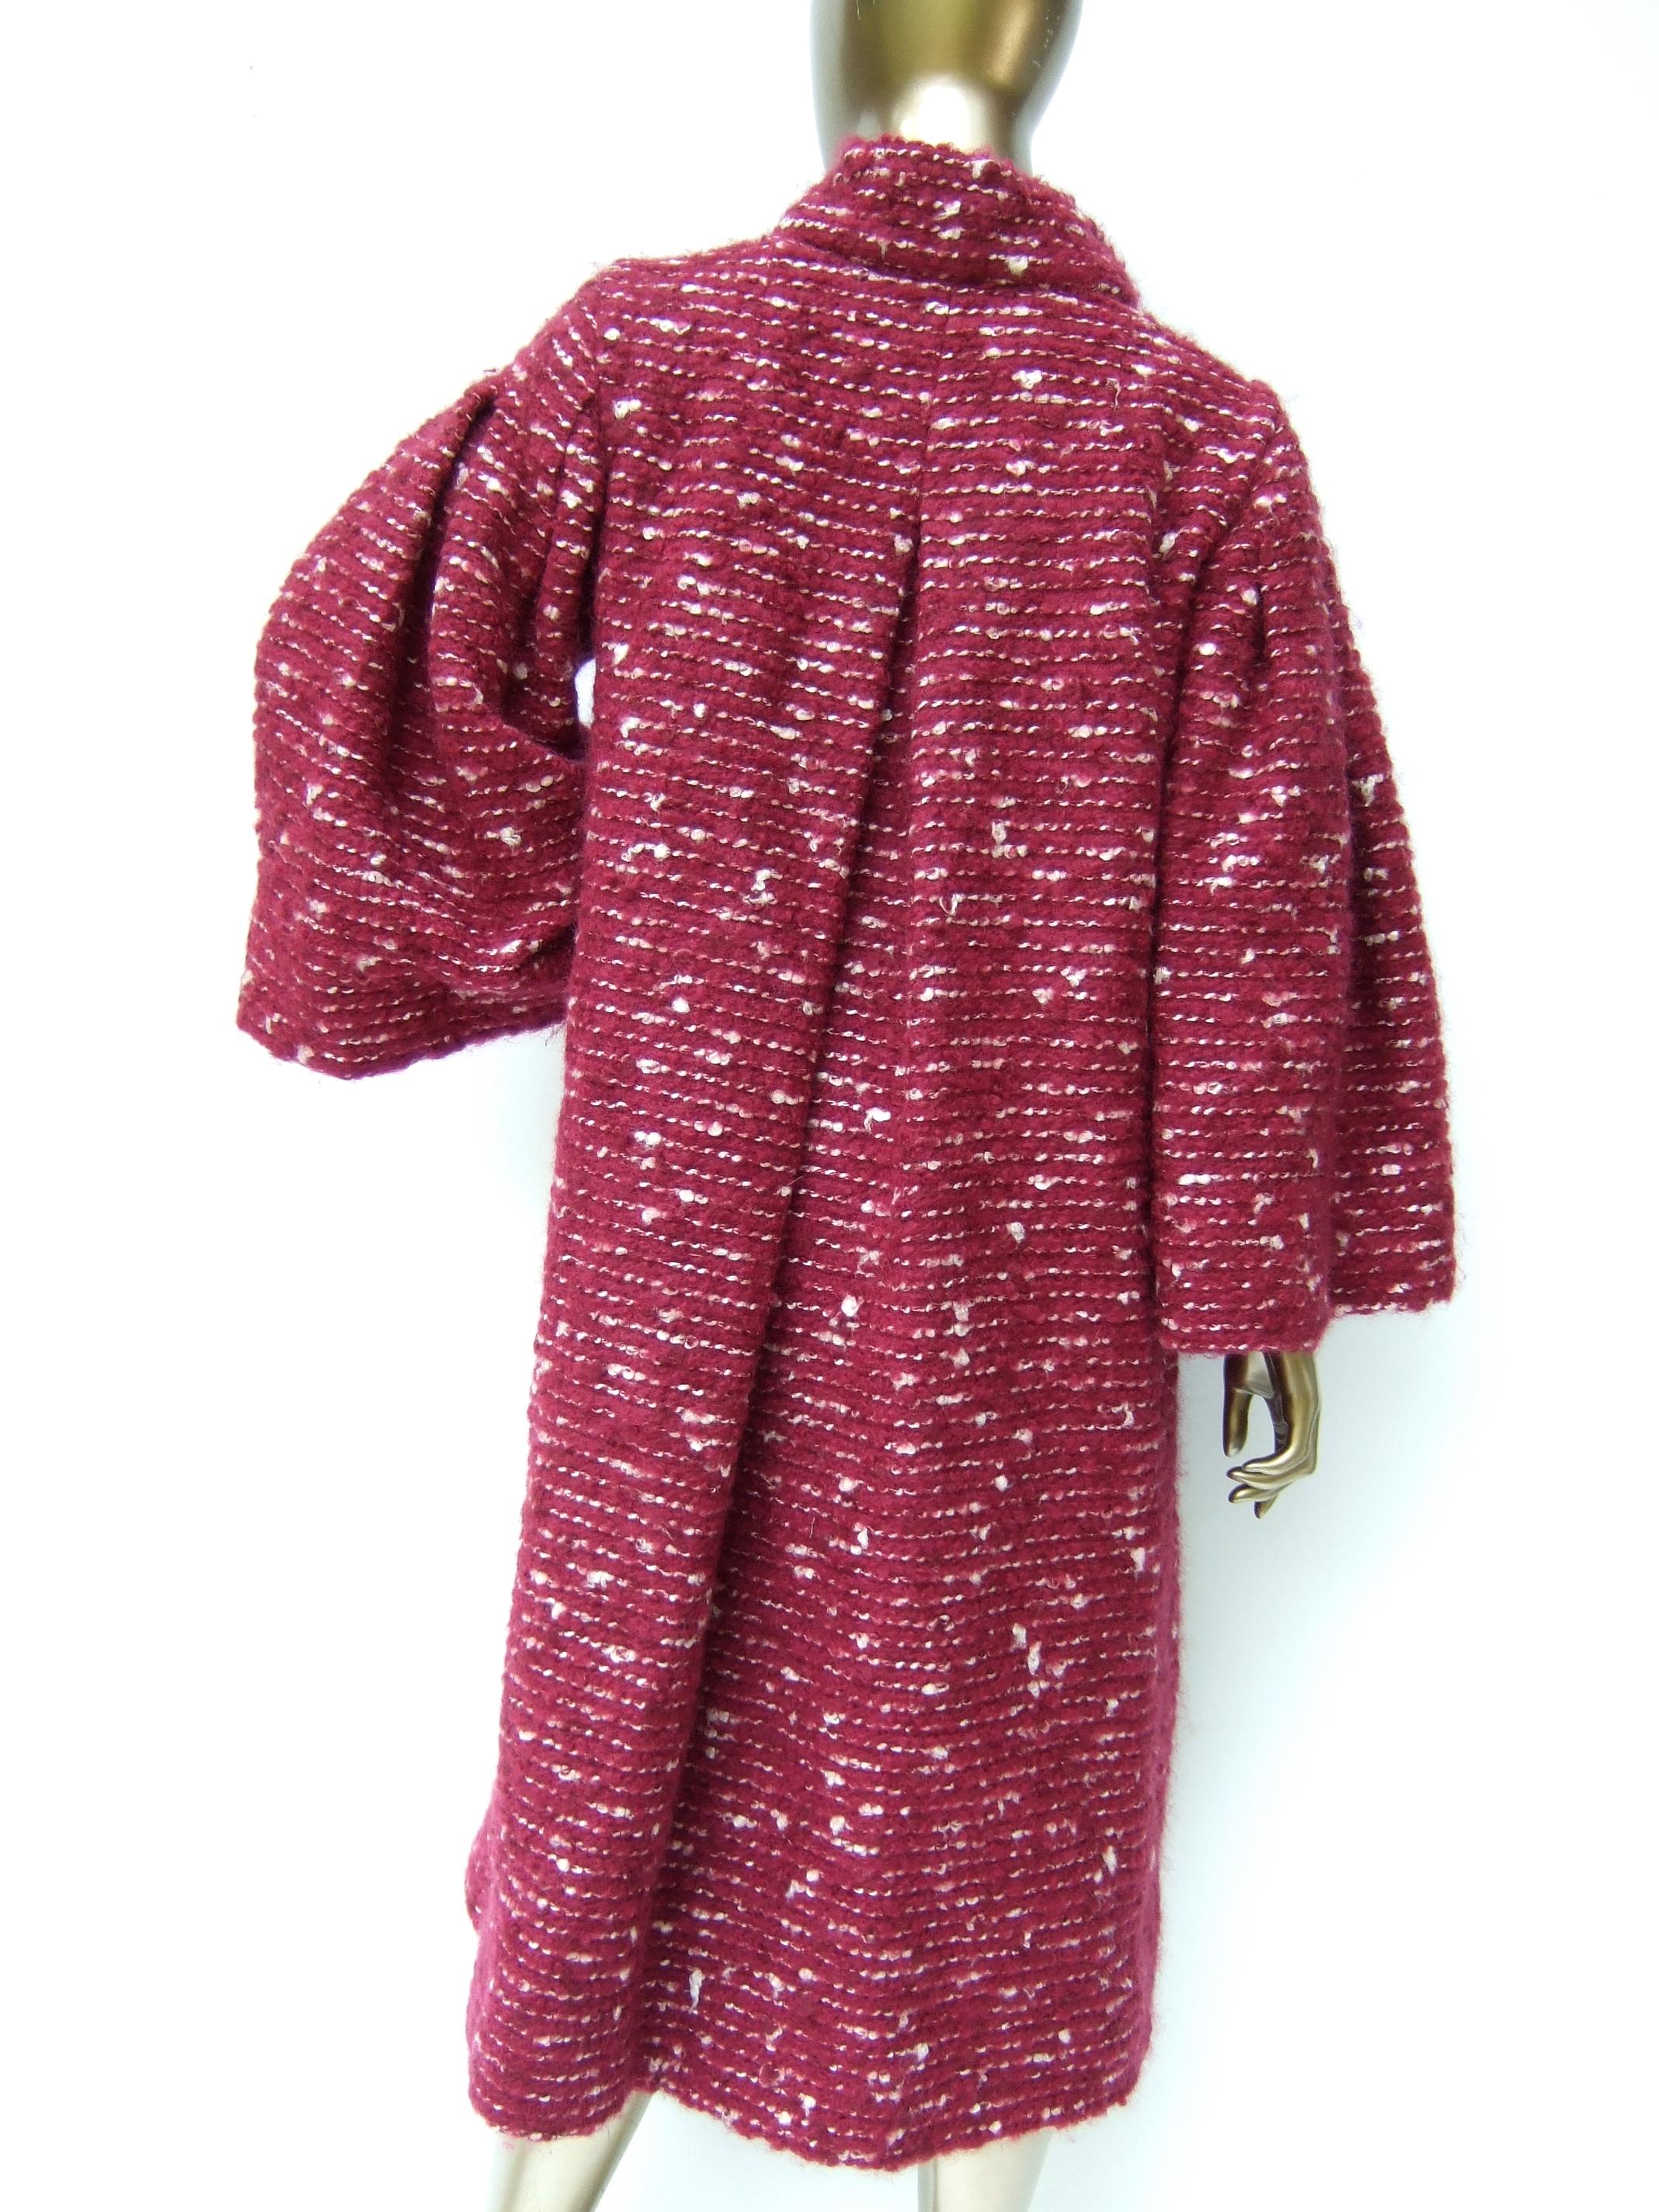 Pauline Trigere Chic Burgundy Chunky Wool Knit Cocoon Coat c 1960  For Sale 14